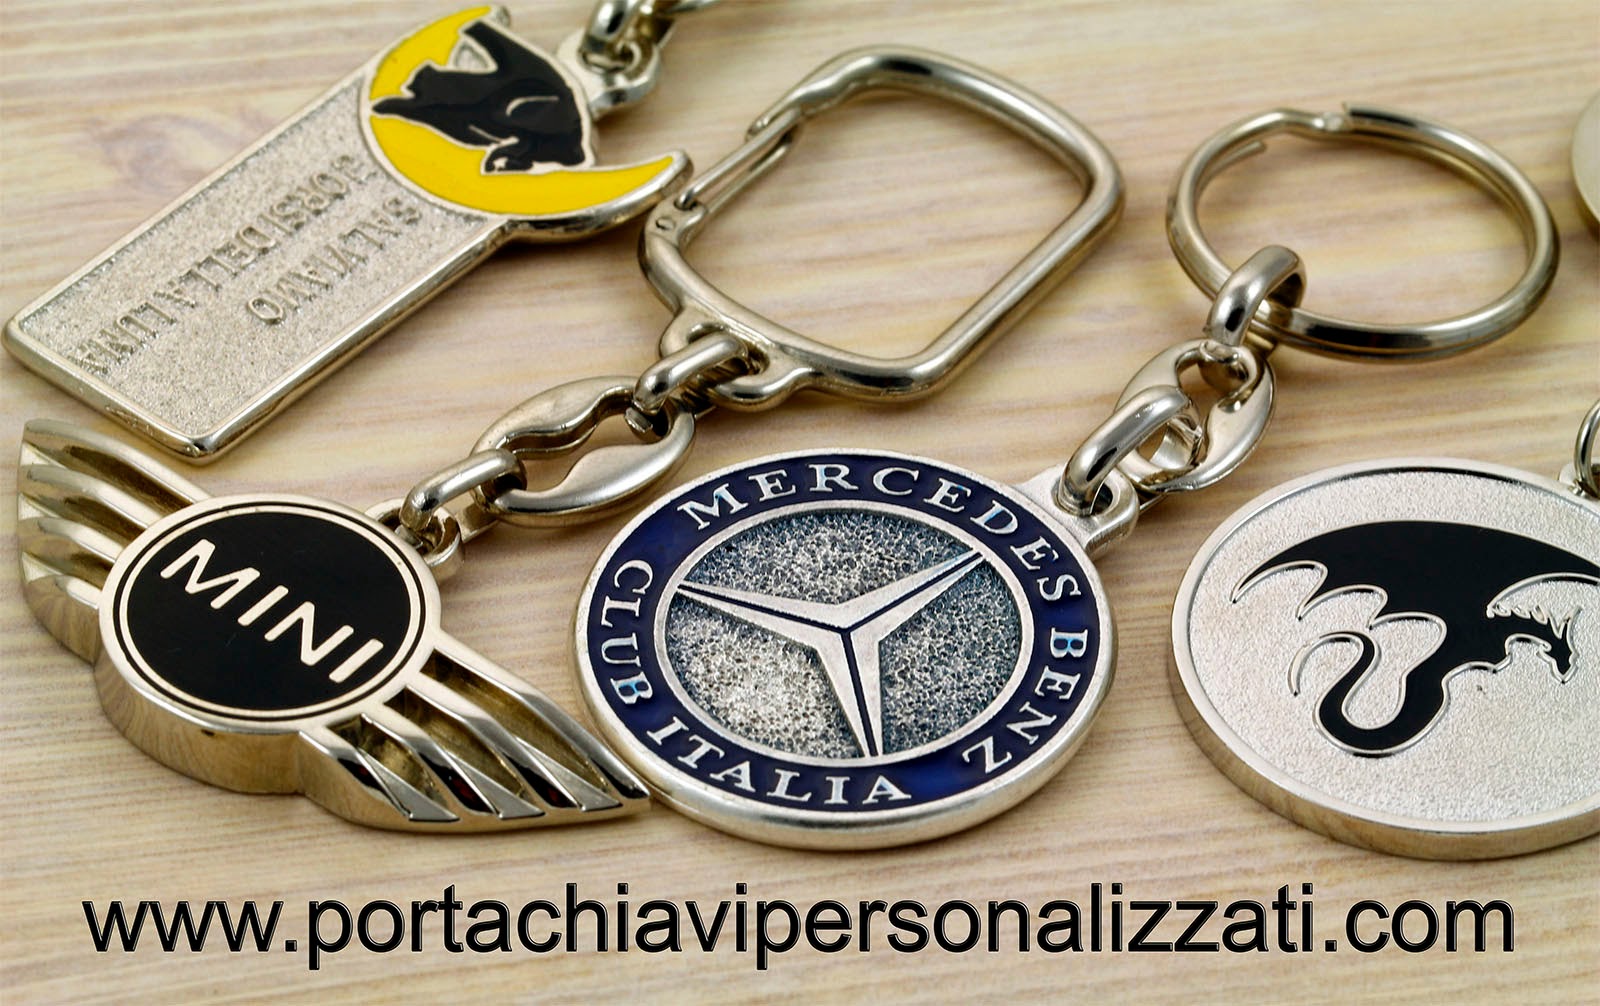 promotional key chains and personalized key rings